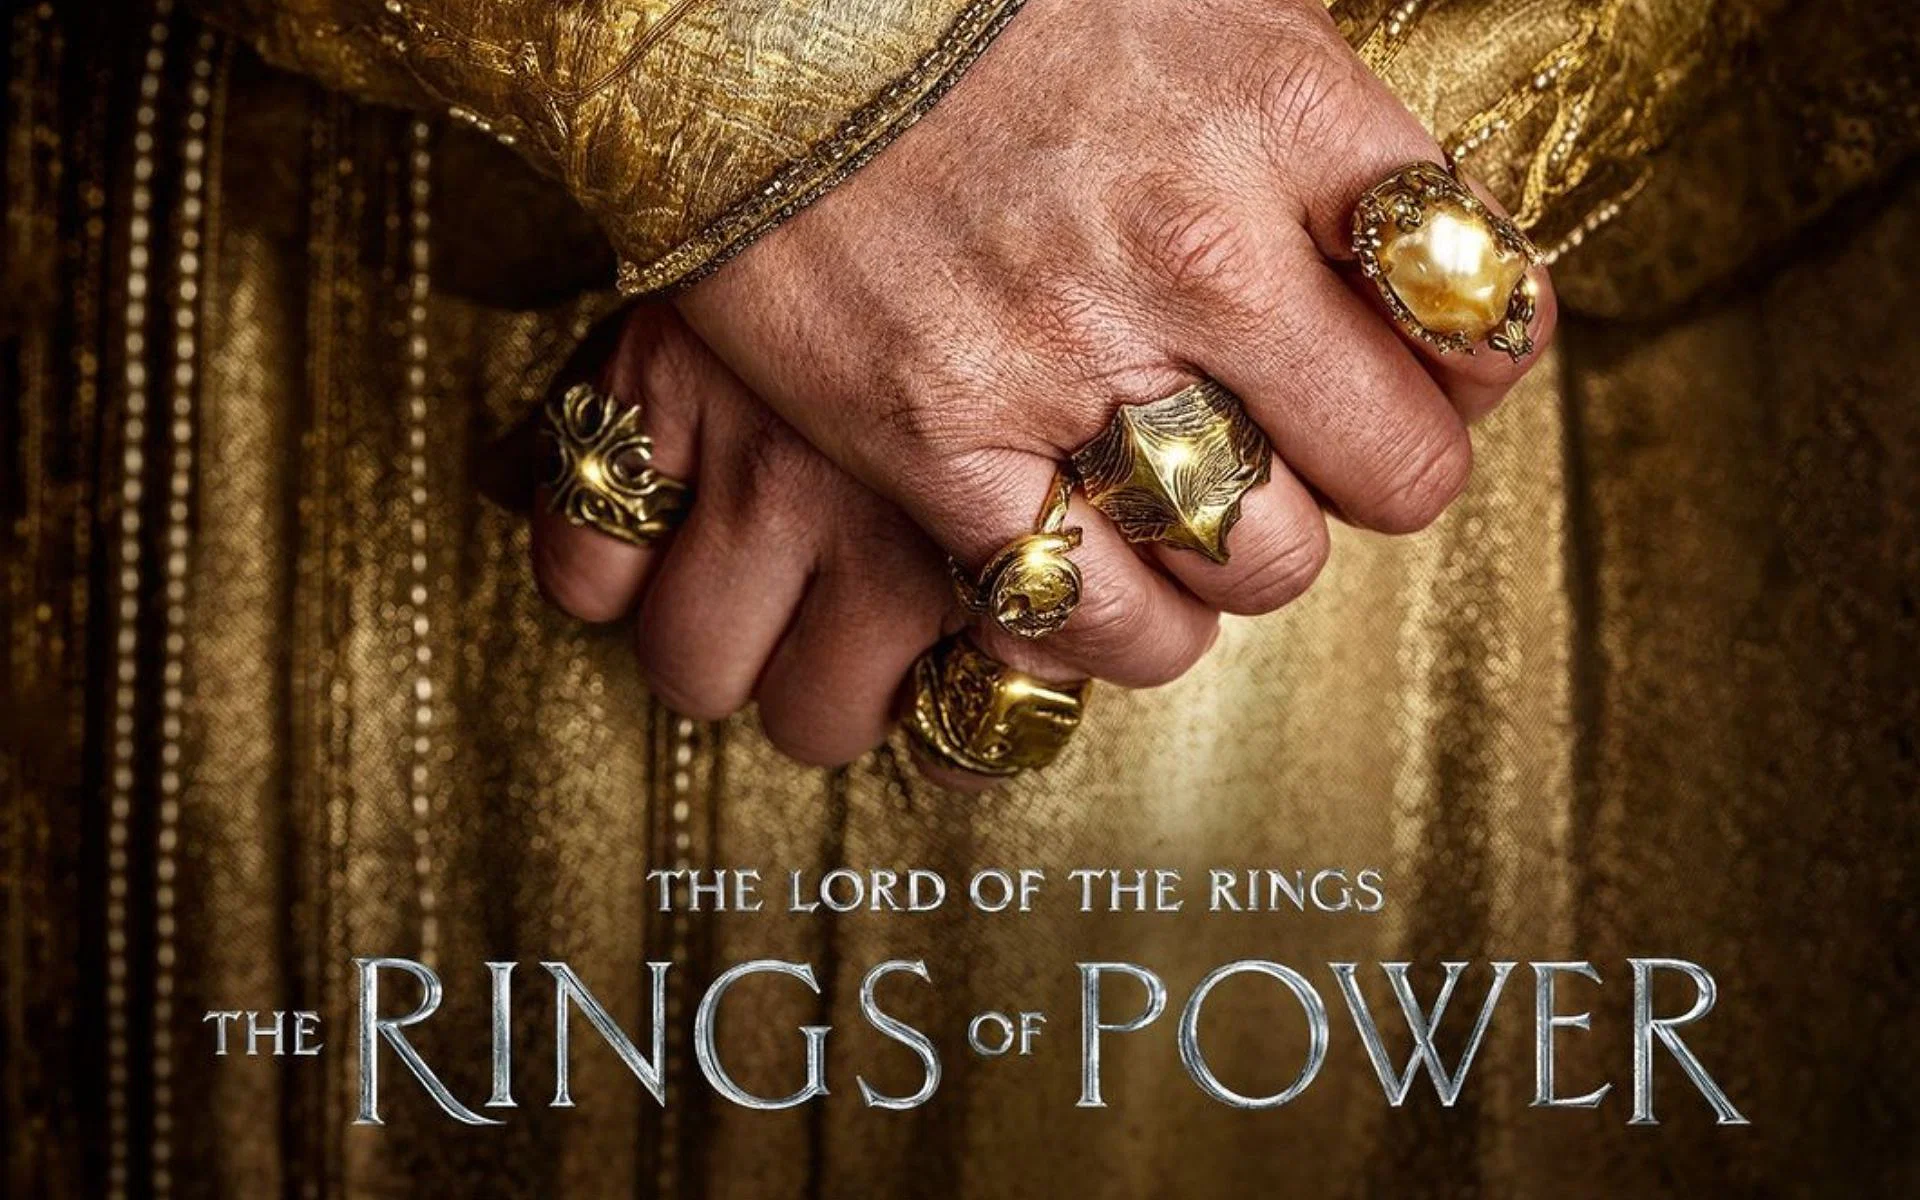 Lord of the Rings: The Rings of Power' SDCC Trailer 